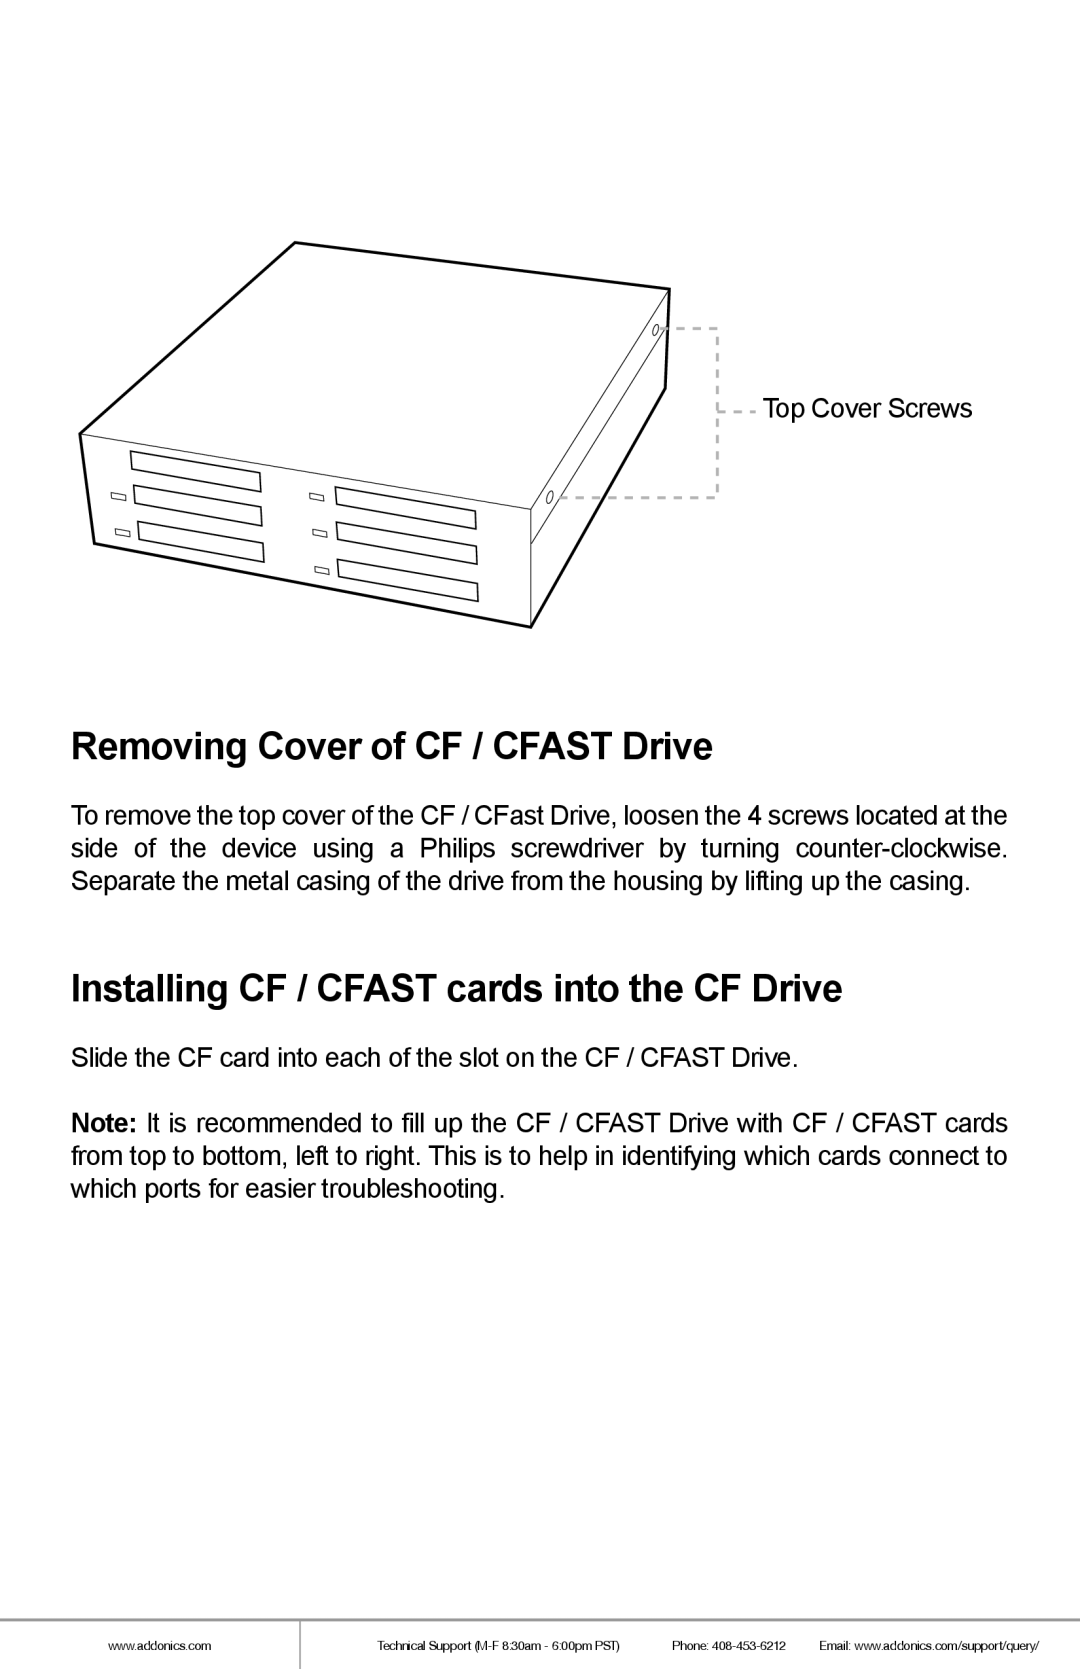 Addonics Technologies AE6CFHI, AE6CAHI Removing Cover of CF / CFAST Drive, Installing CF / CFAST cards into the CF Drive 